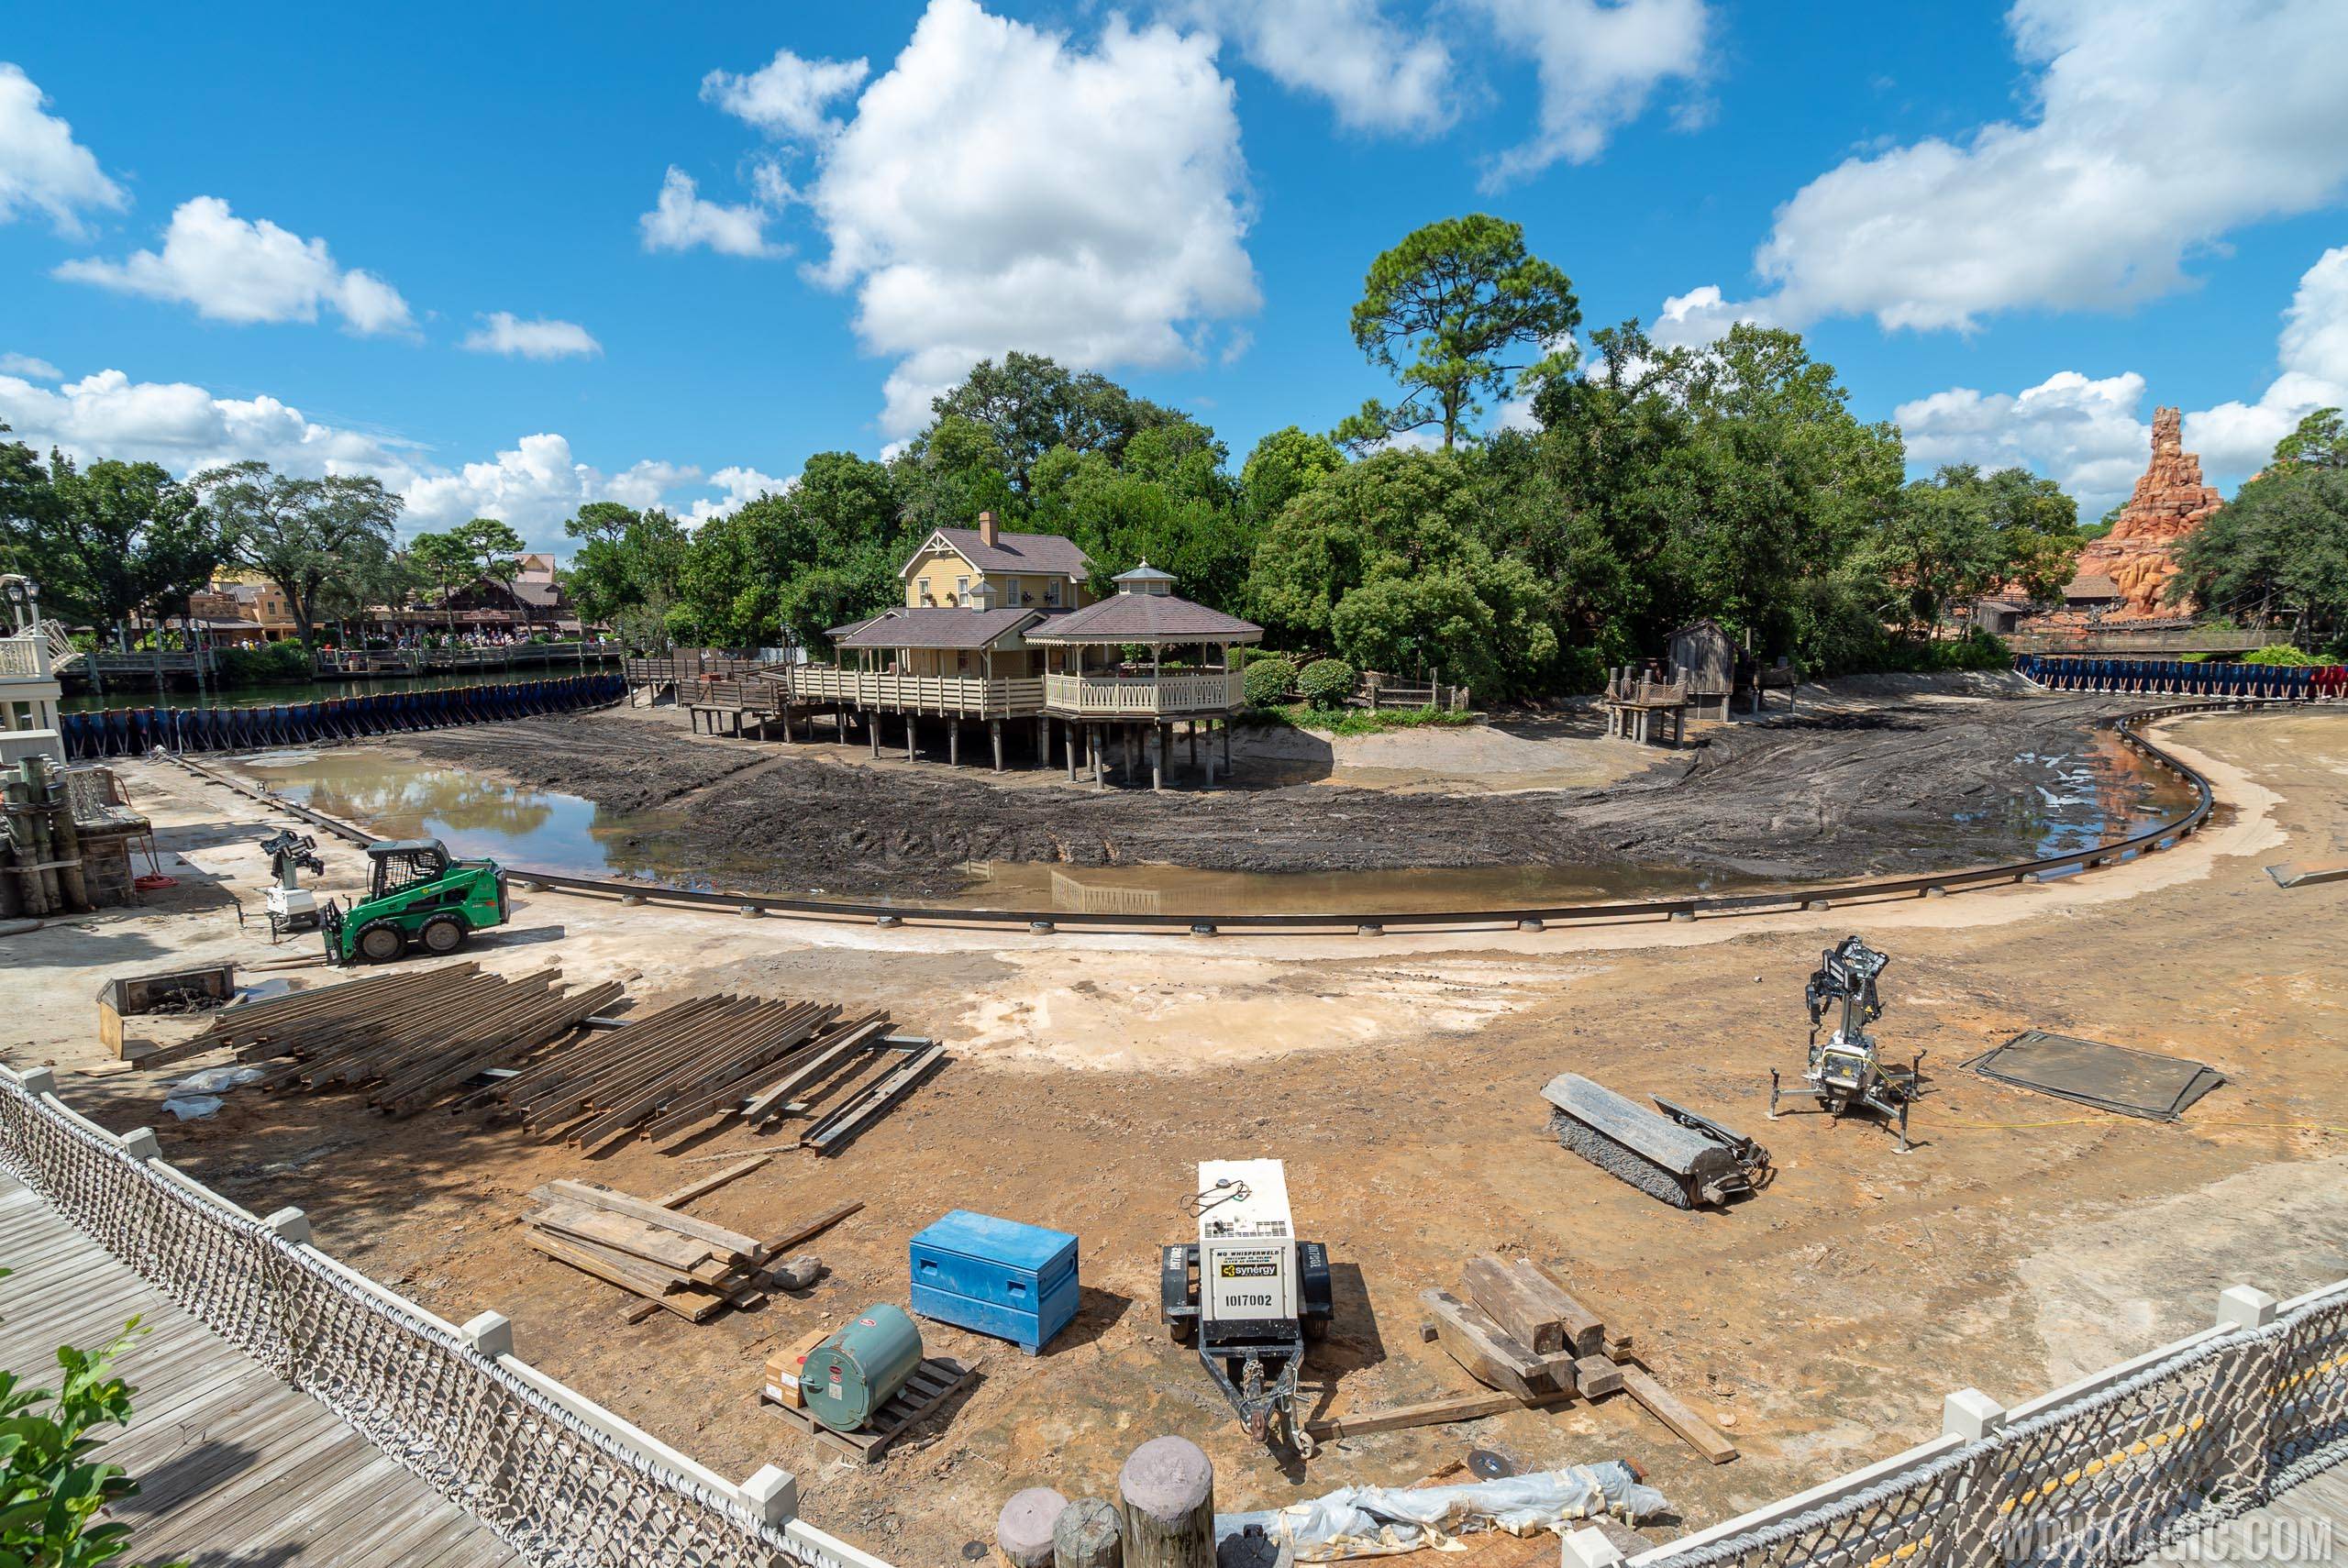 PHOTOS - Latest look at the Rivers of America refurbishment